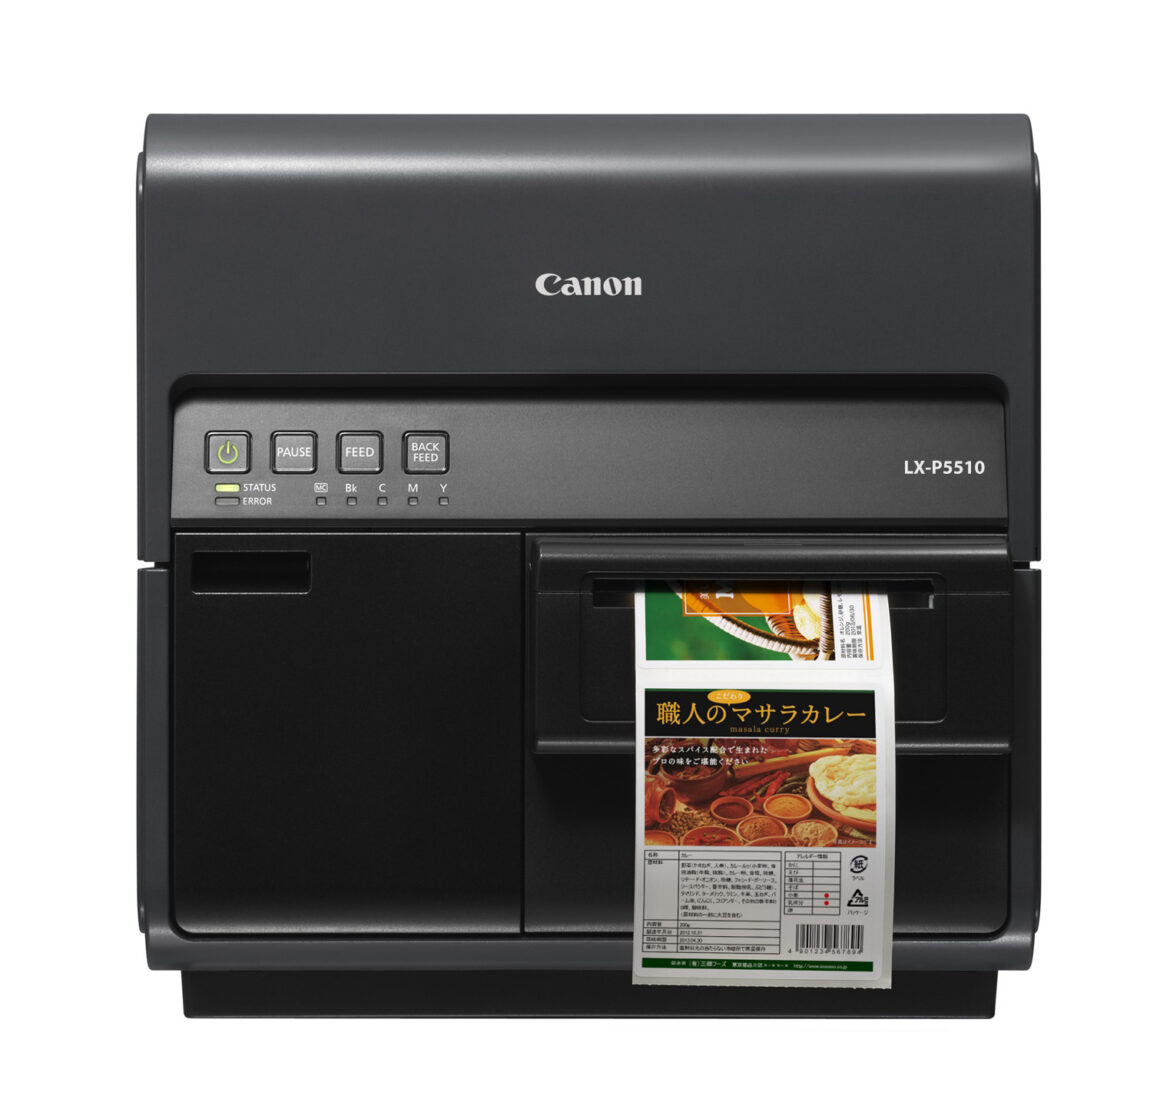 Canon’s New Pigment Label Printer Enables High-Speed Printing of Four-Inch Wide Labels